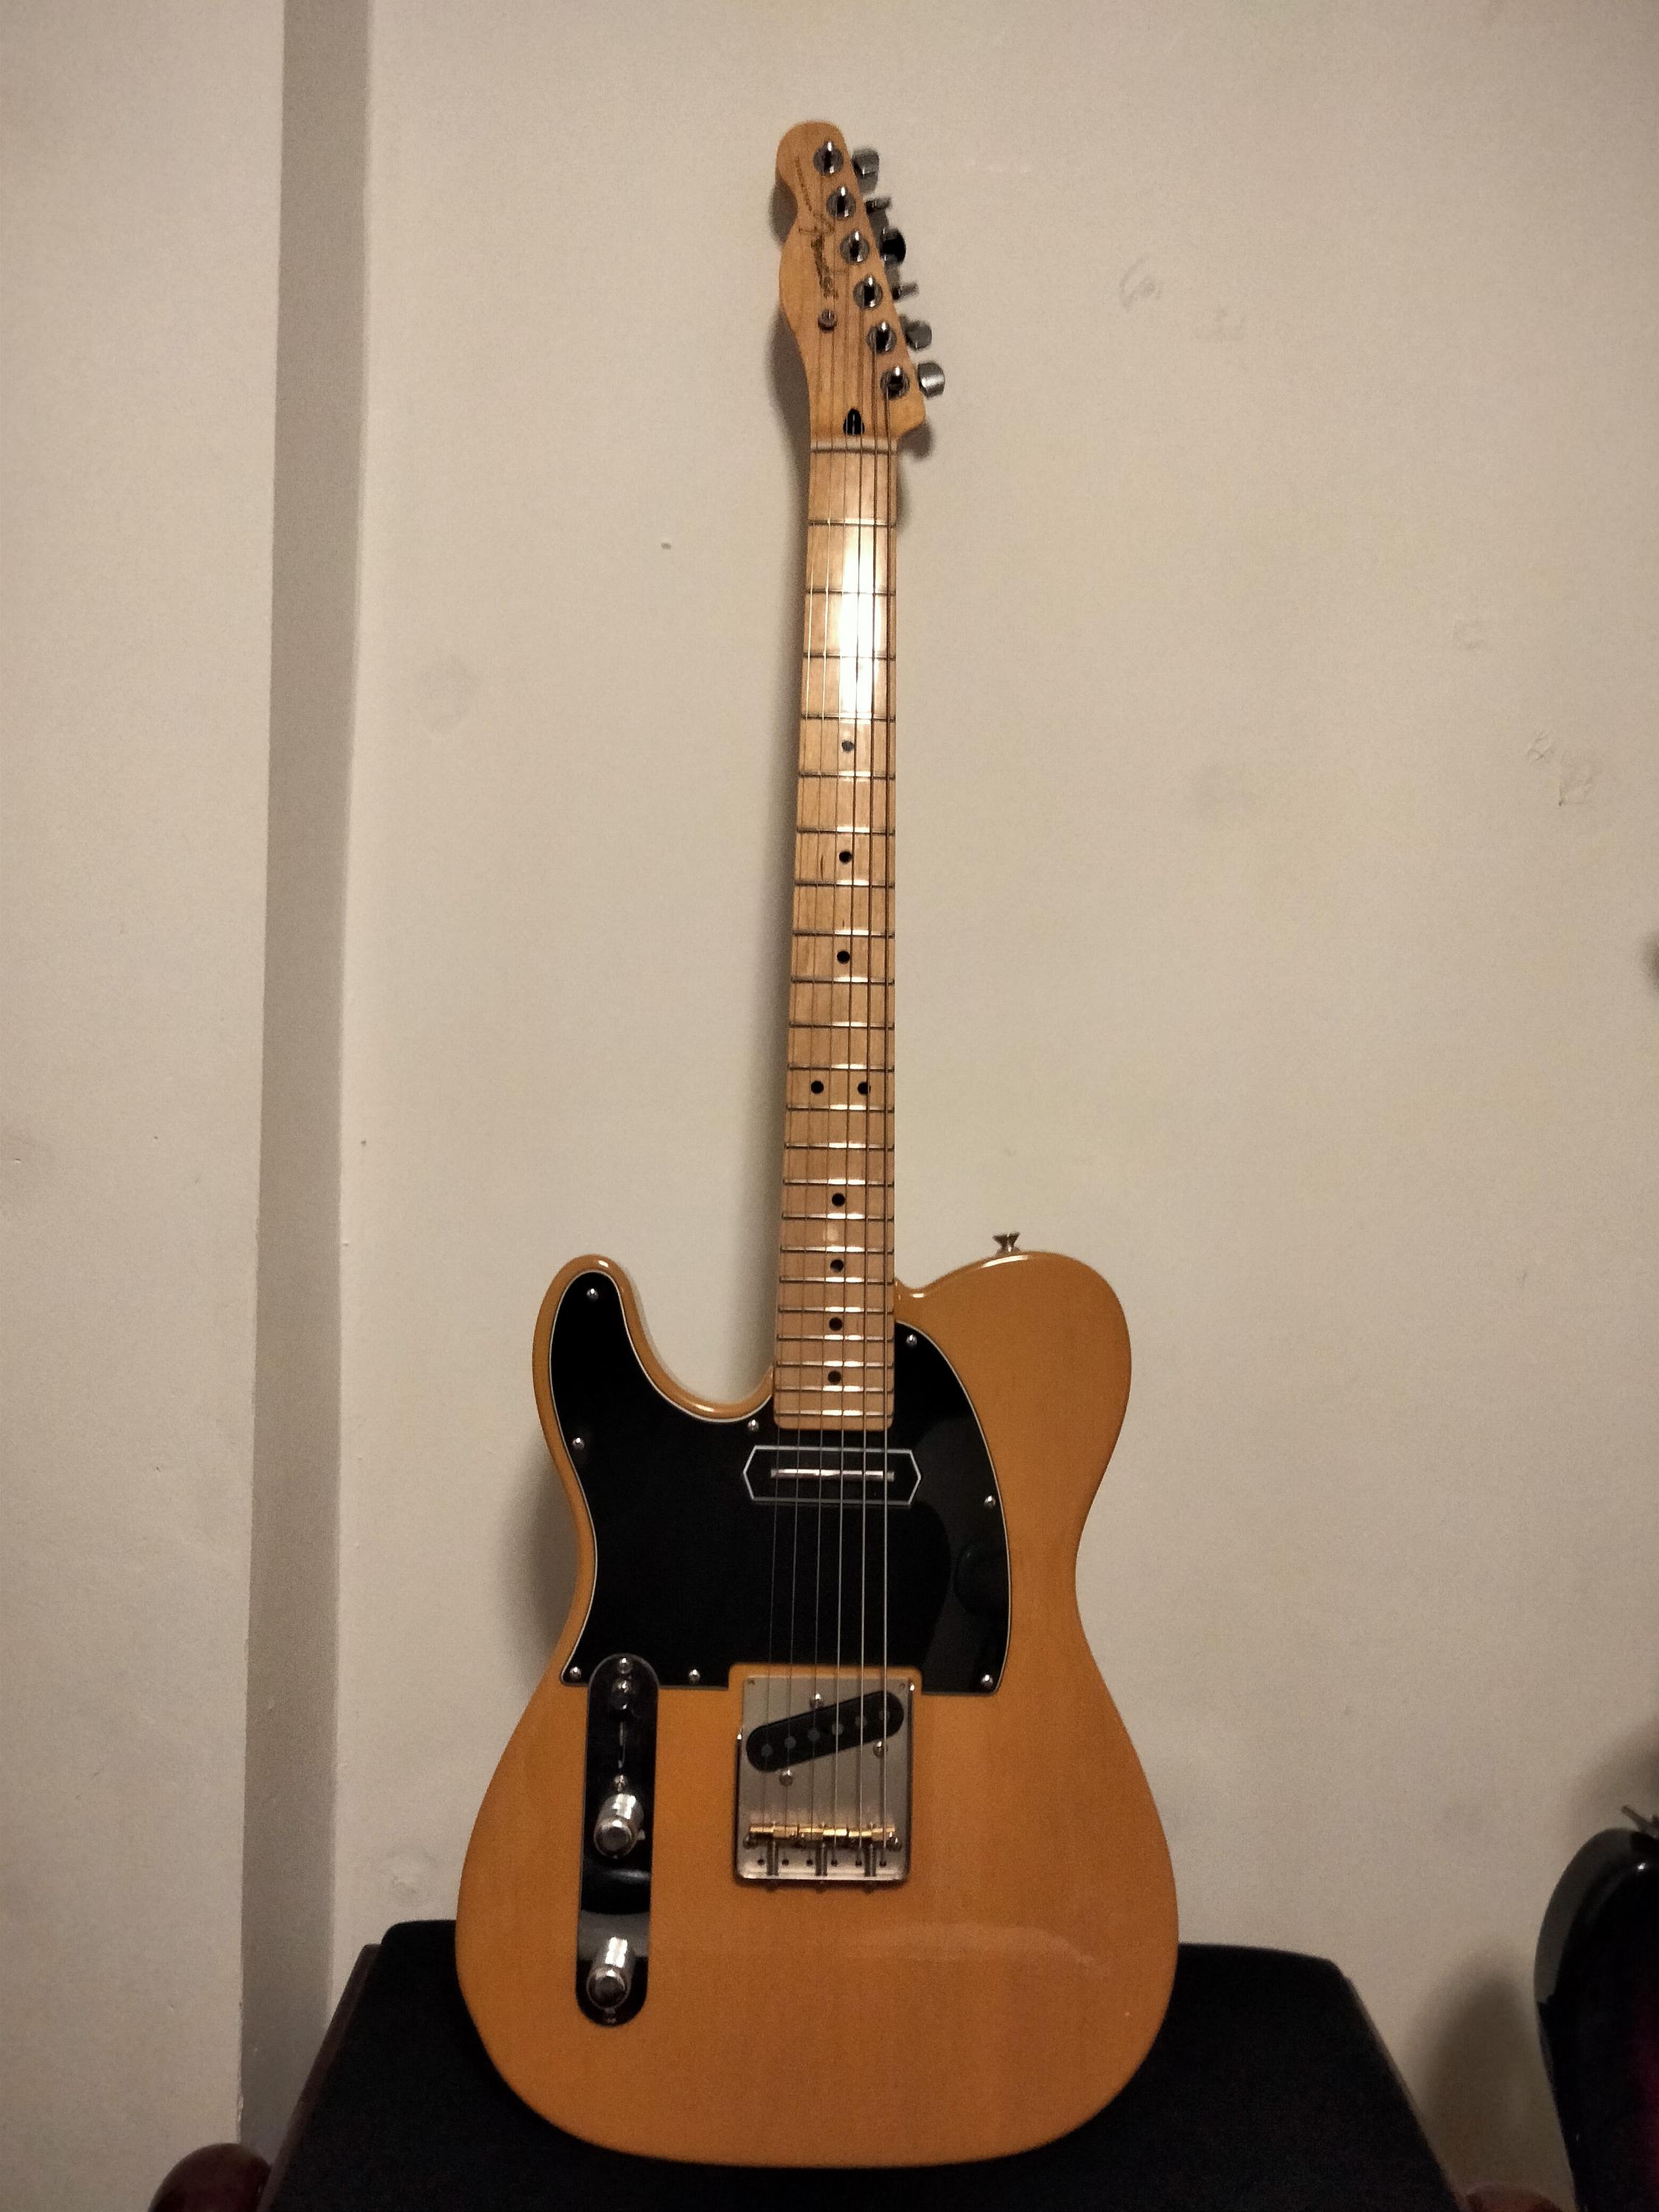 Telecaster Love Thread, No Archtops Allowed-img20230421233017-jpg